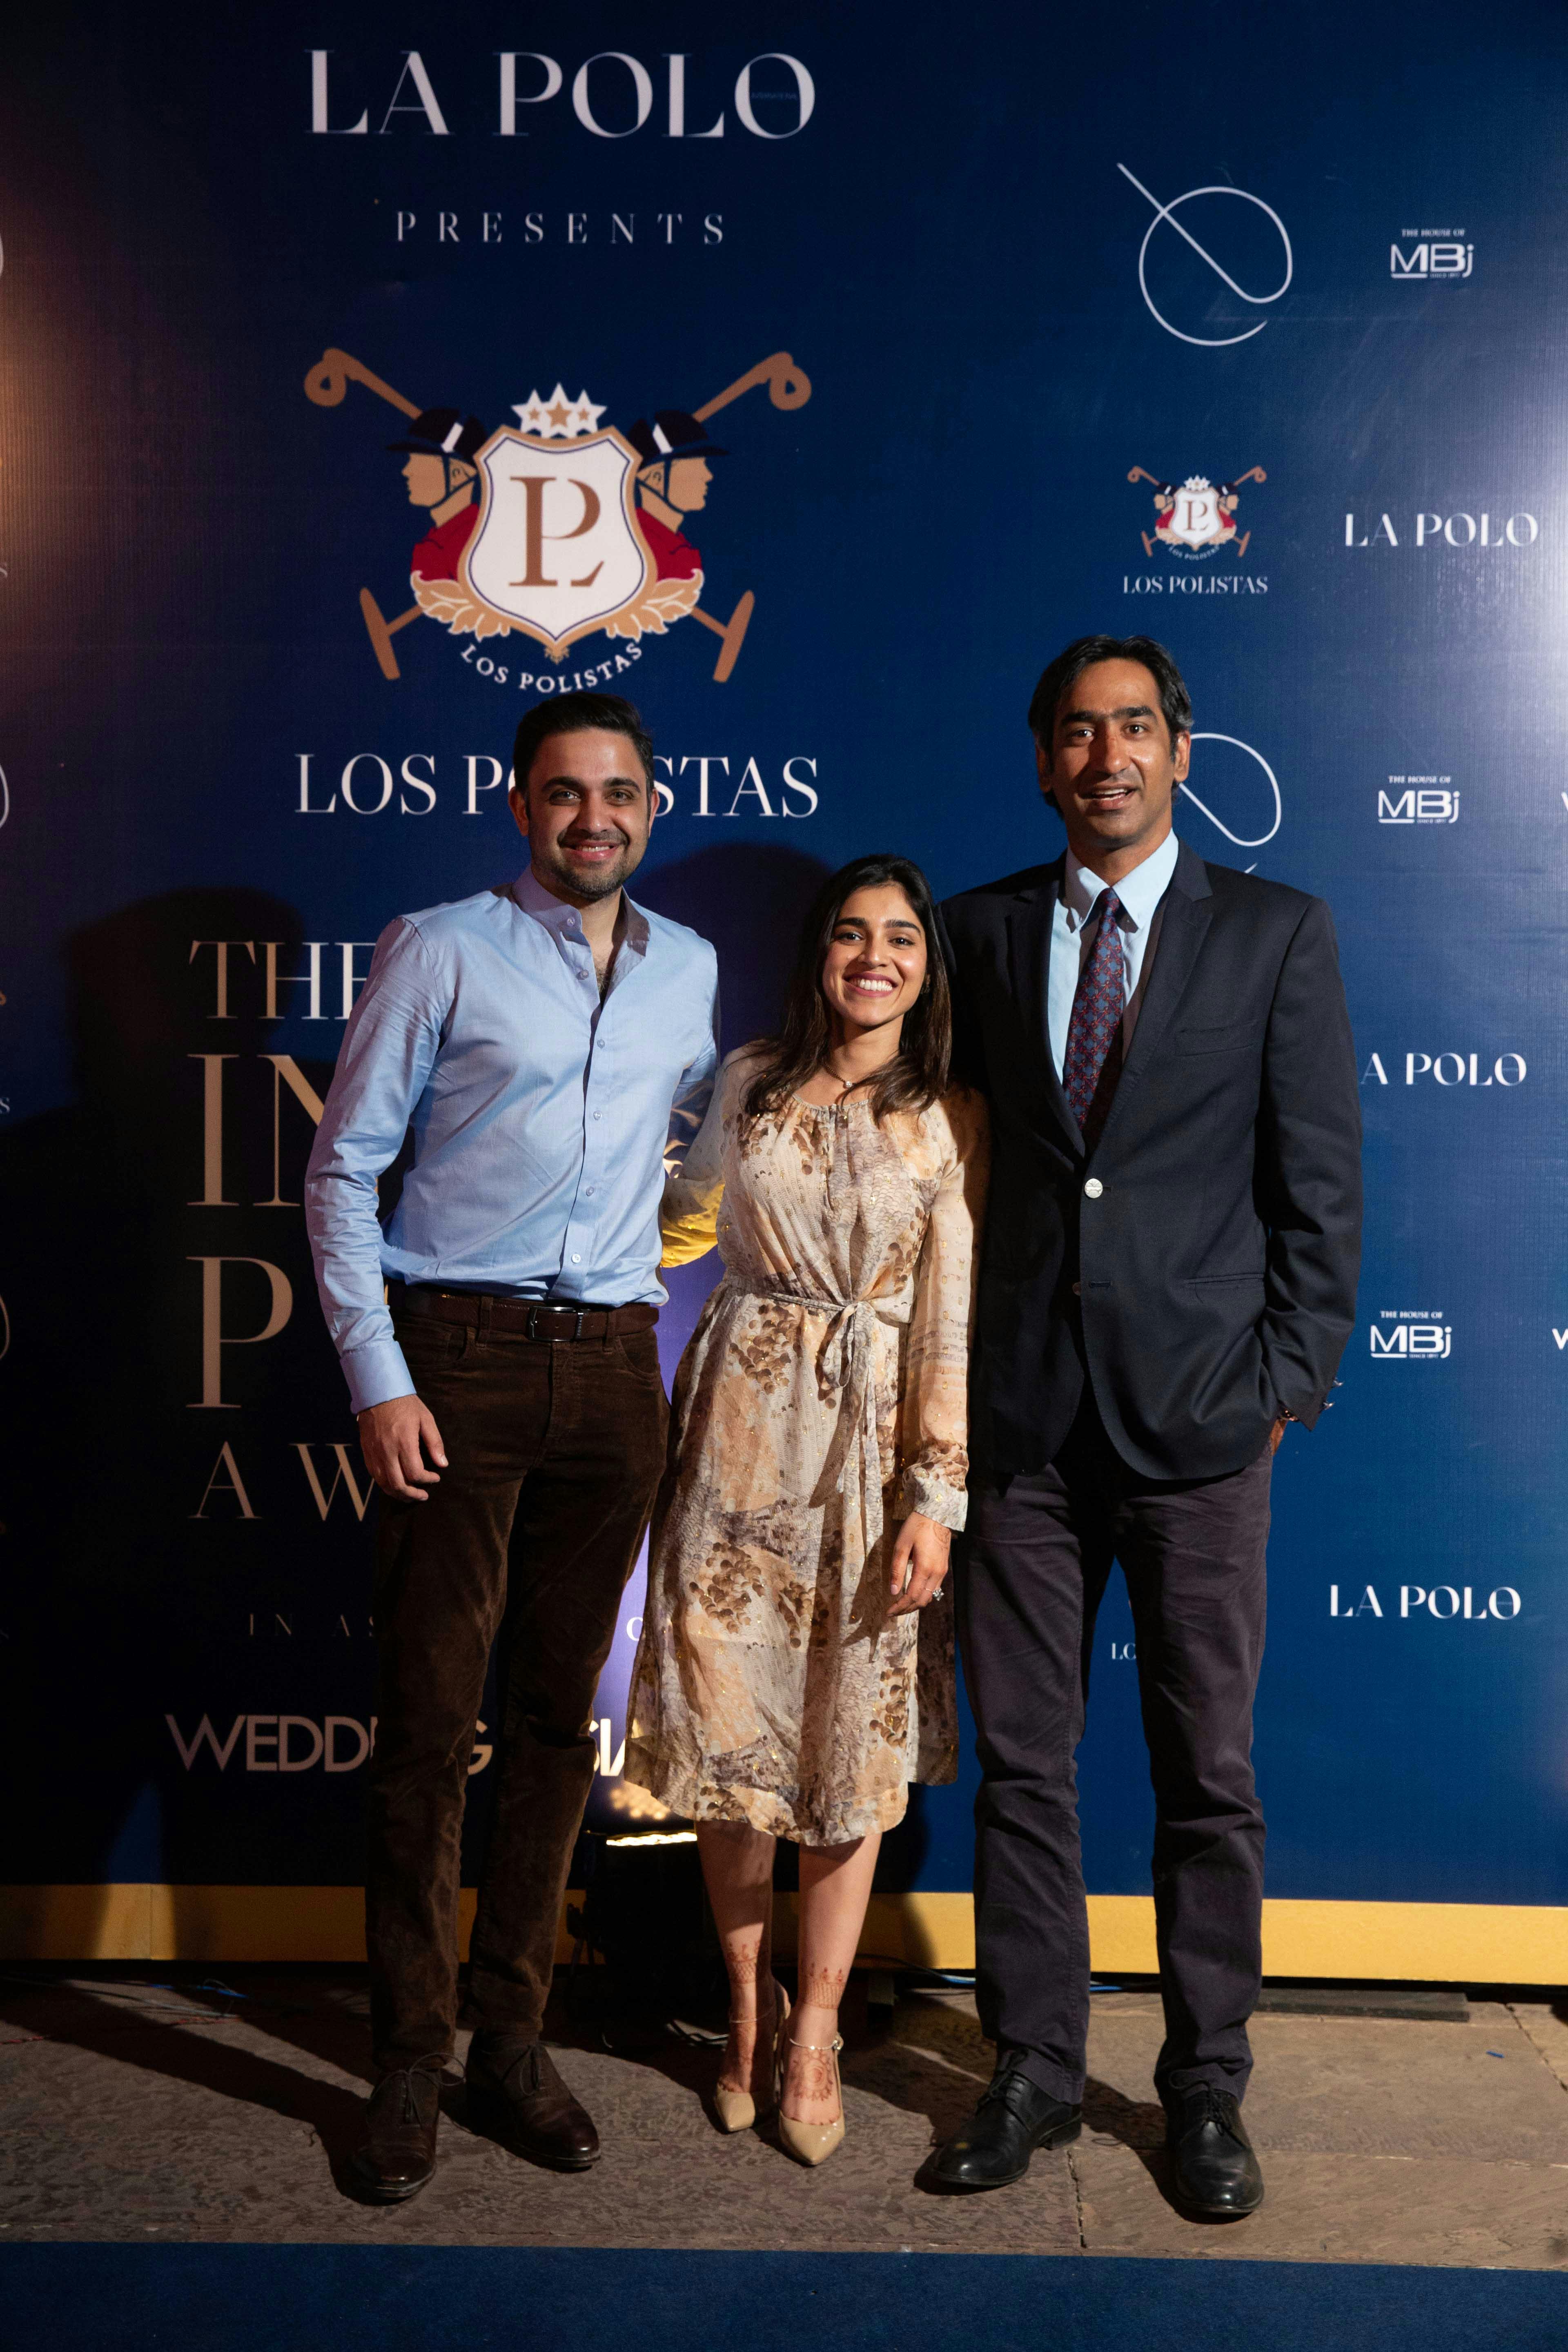 The Indian Polo Awards Most Valuable Player and Arjuna Awardee, Simran S. Shergill on the blue carpet